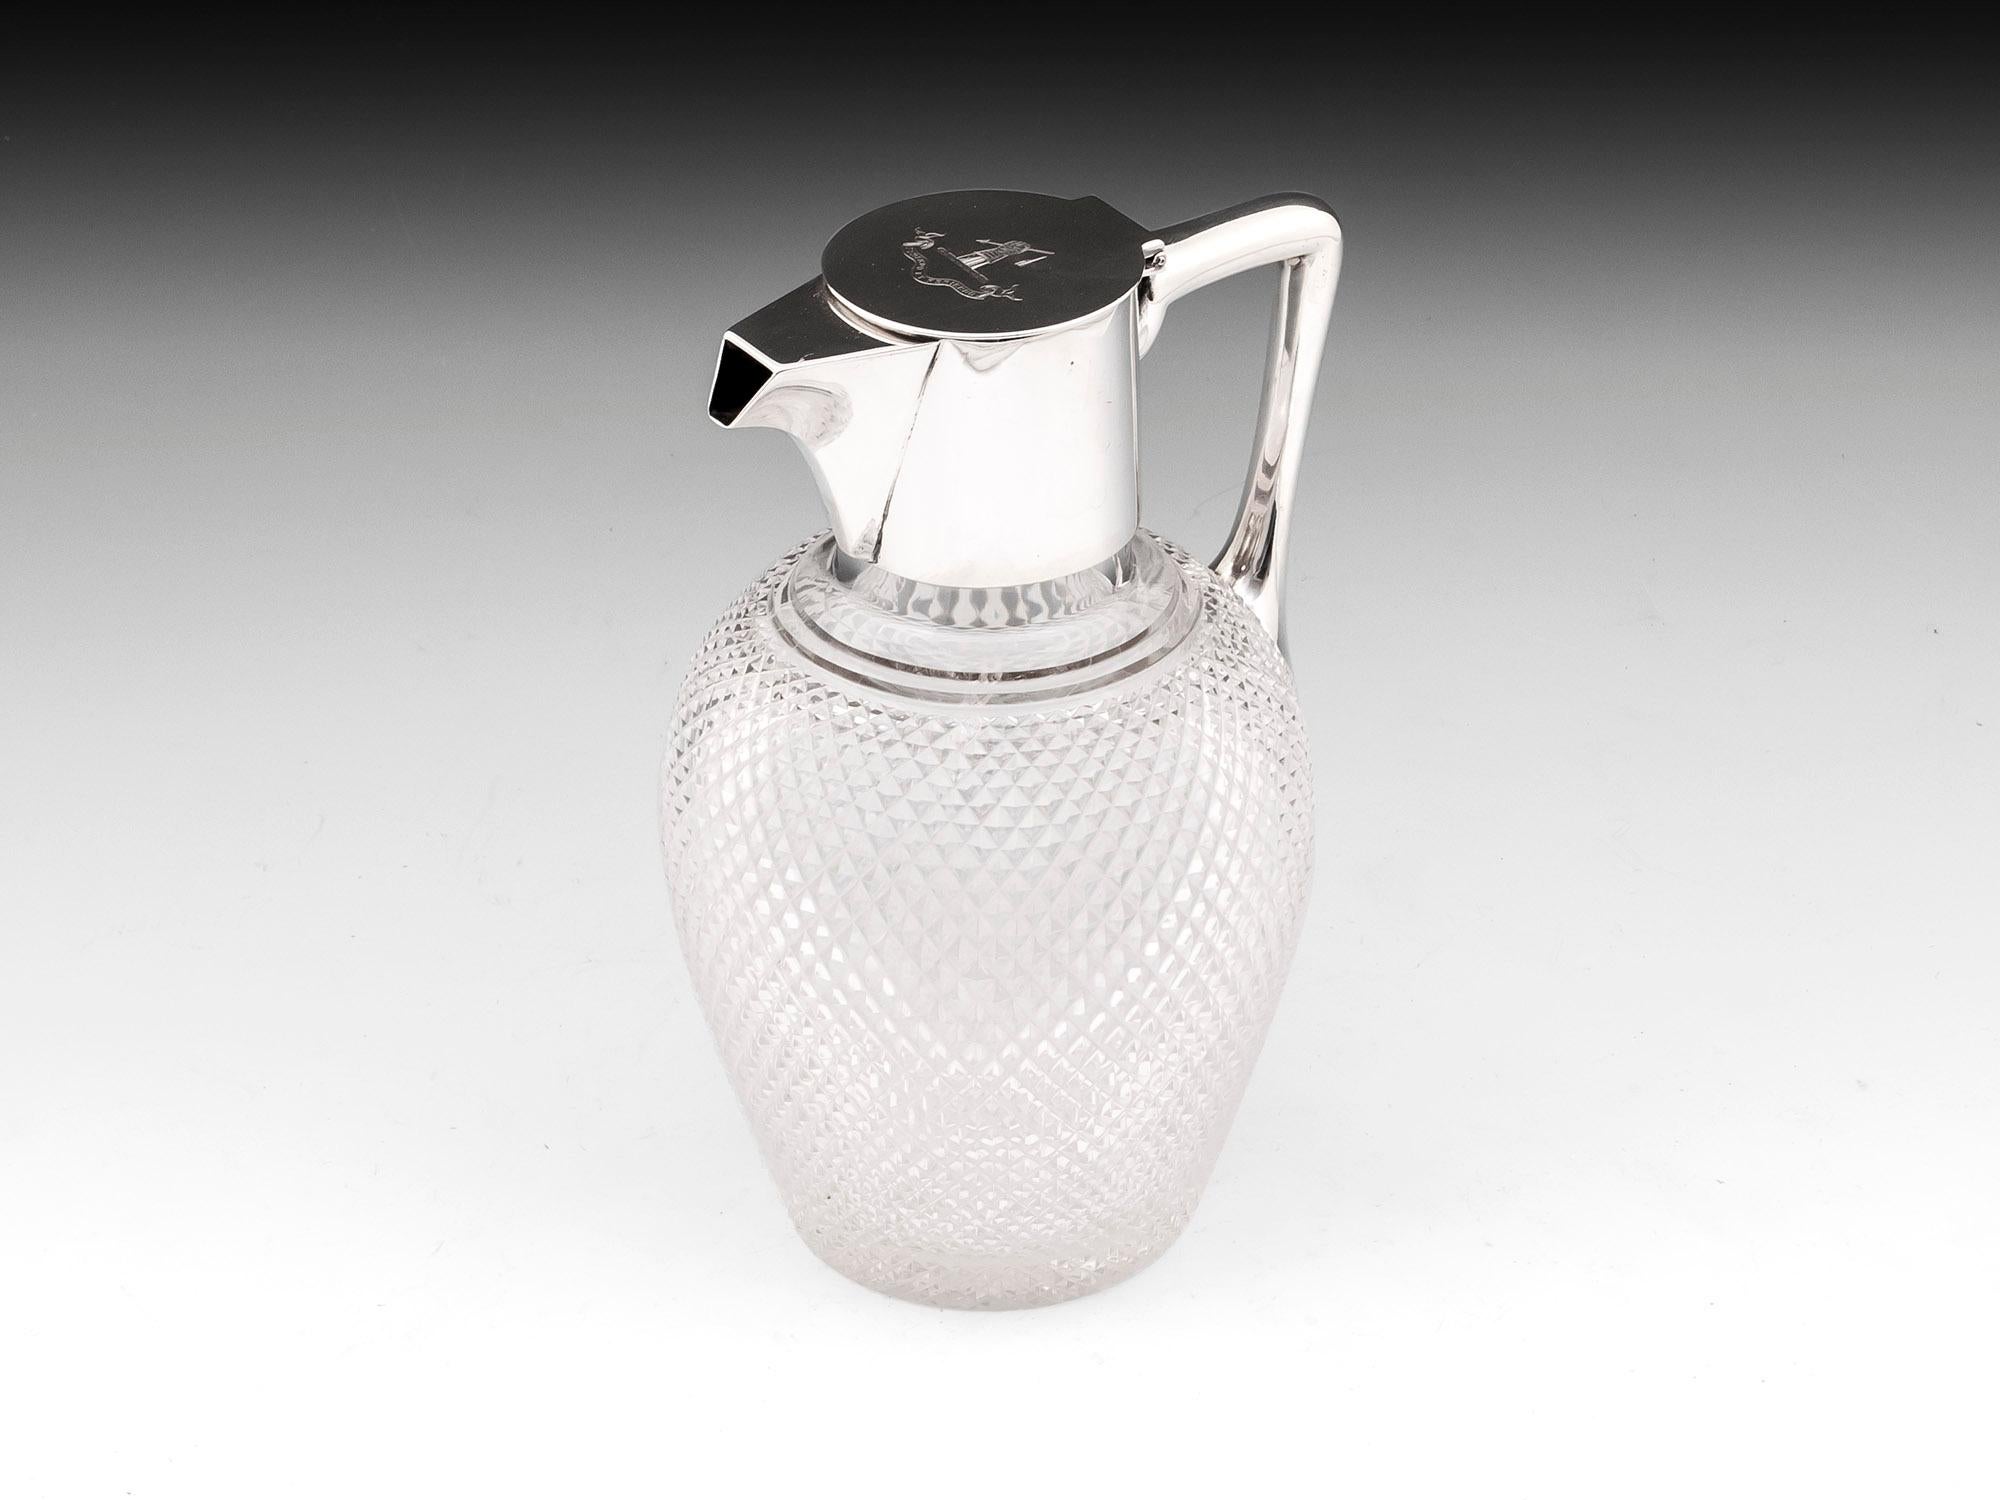 Glass claret jug with star cut base and sterling silver top by Birmingham silversmiths Hukin & Heath. With an engraved Harrison family crest on the lid which reads:
Ferendo et Feriendo with translates to 